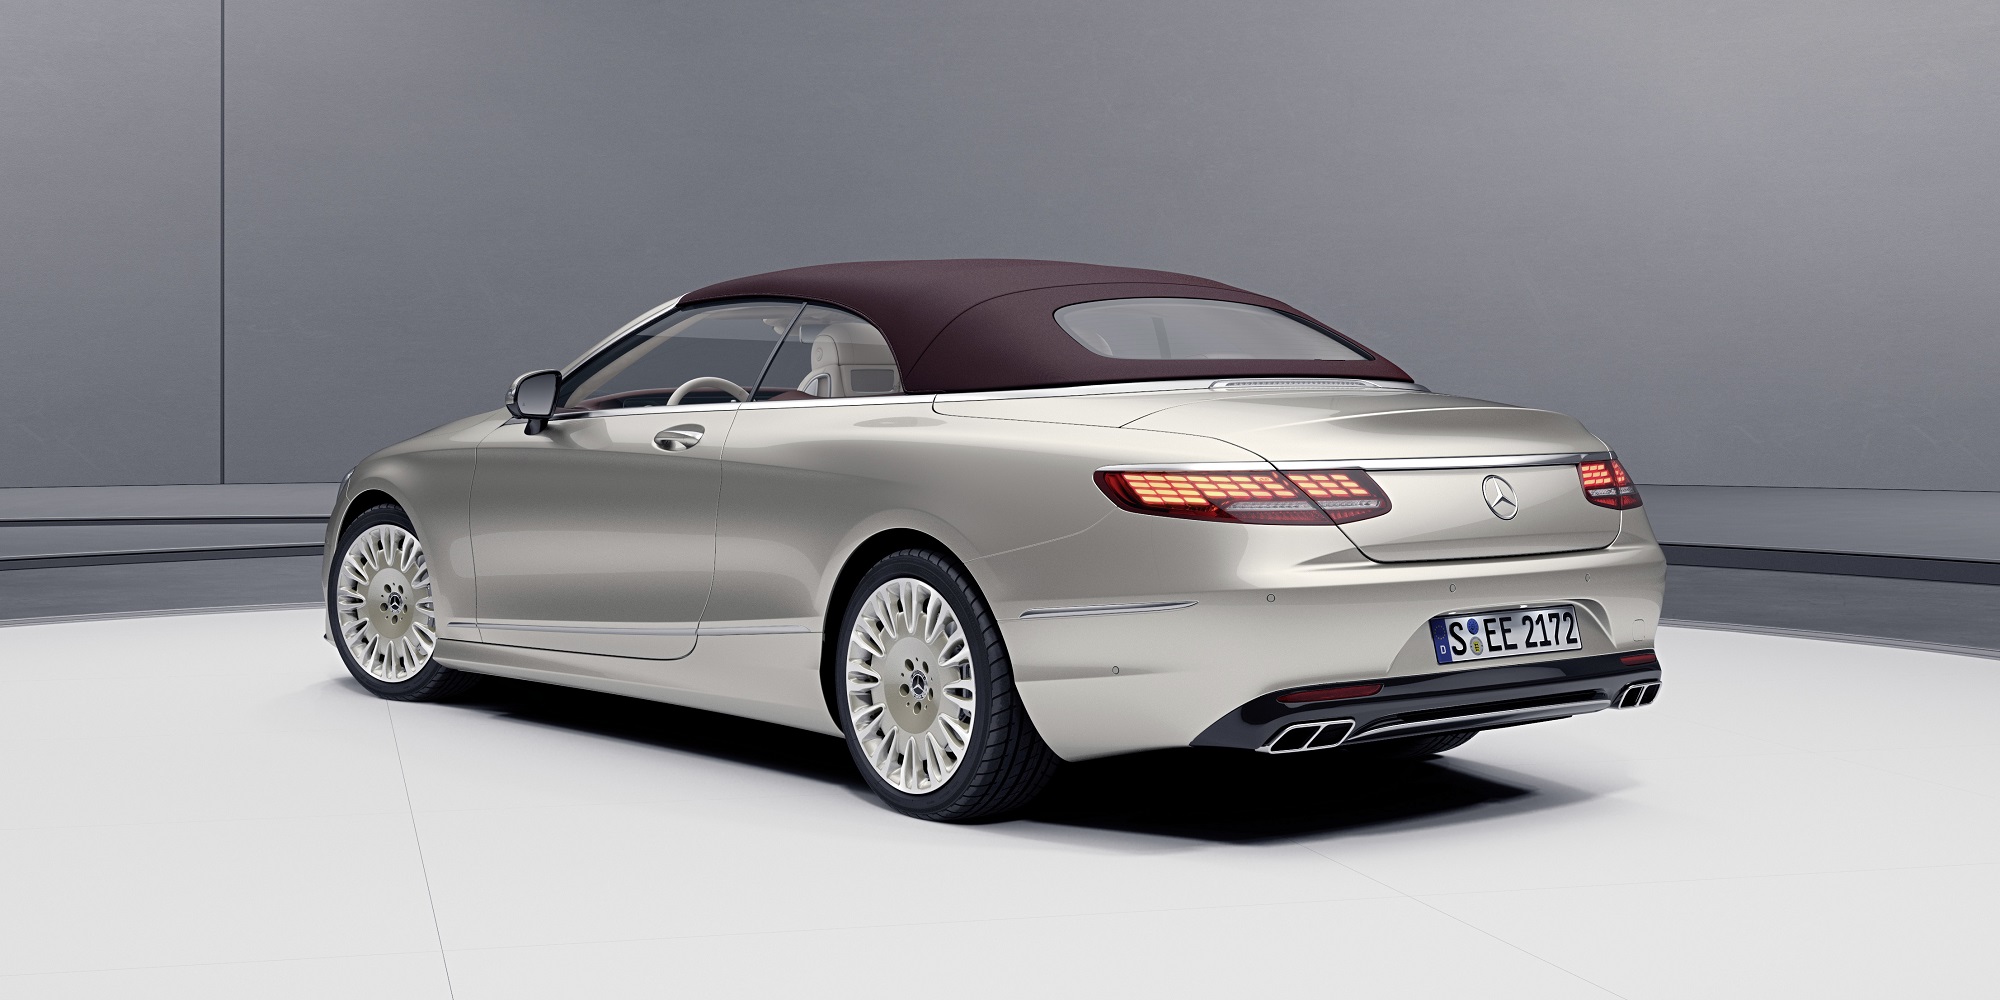 MBWorld.org 2019 Mercedes-Ben S-Class Coupe Convertible Exclusive Edition